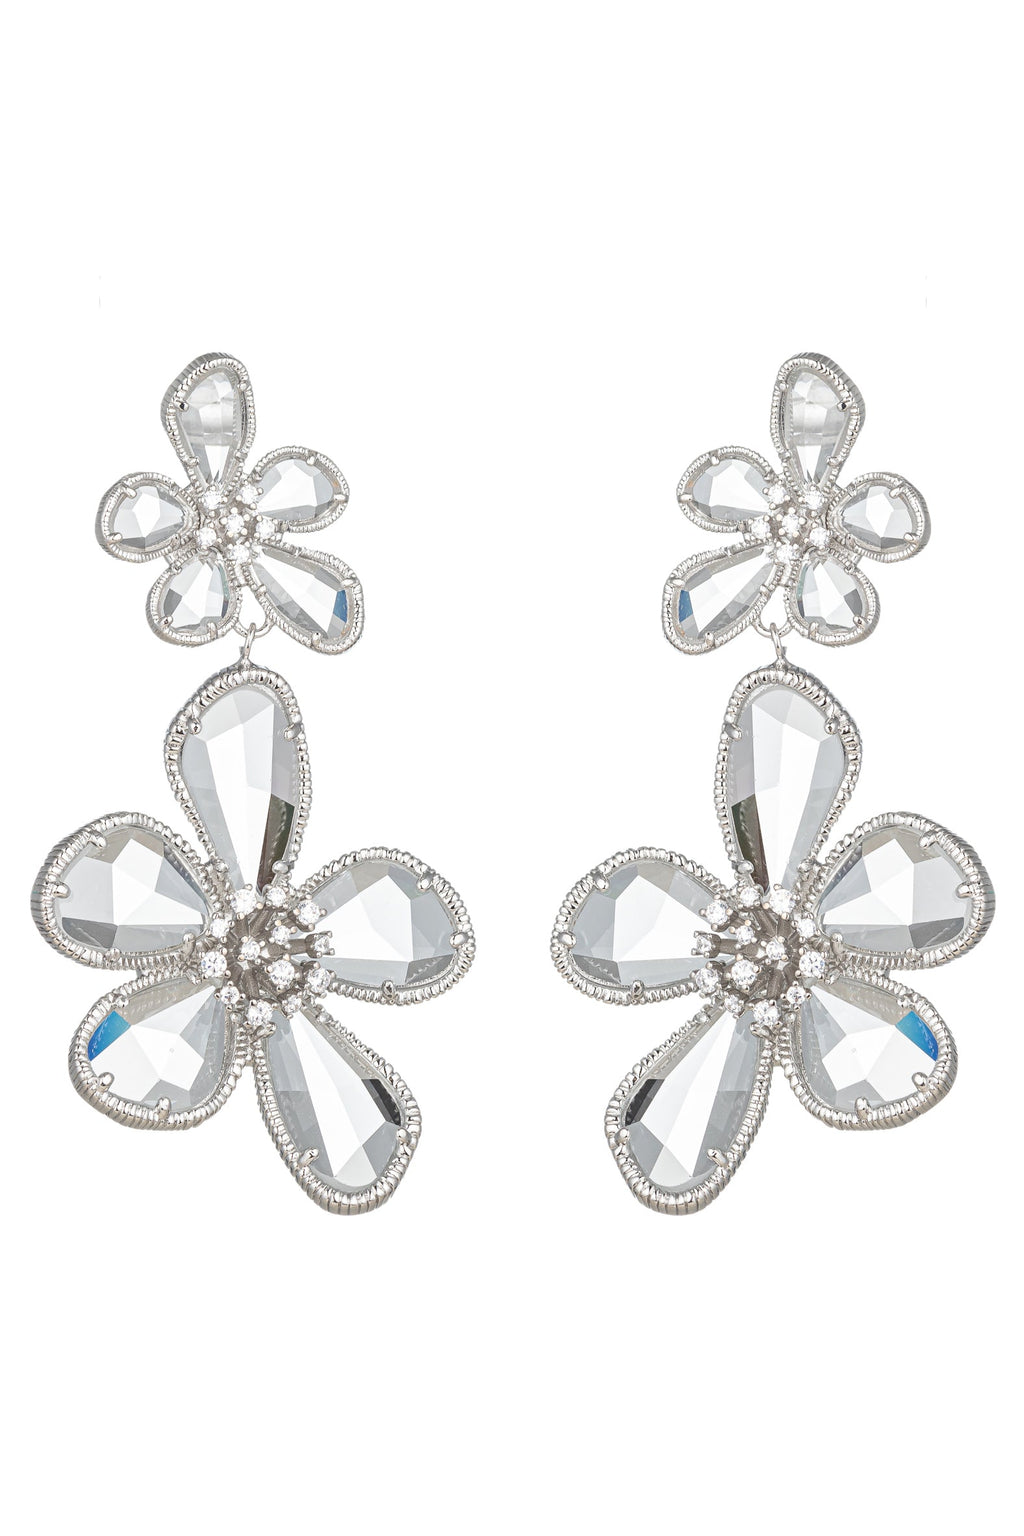 Add a touch of elegance with these 18K gold plated earrings adorned with sparkling cubic zirconia, featuring a charming double flower design.